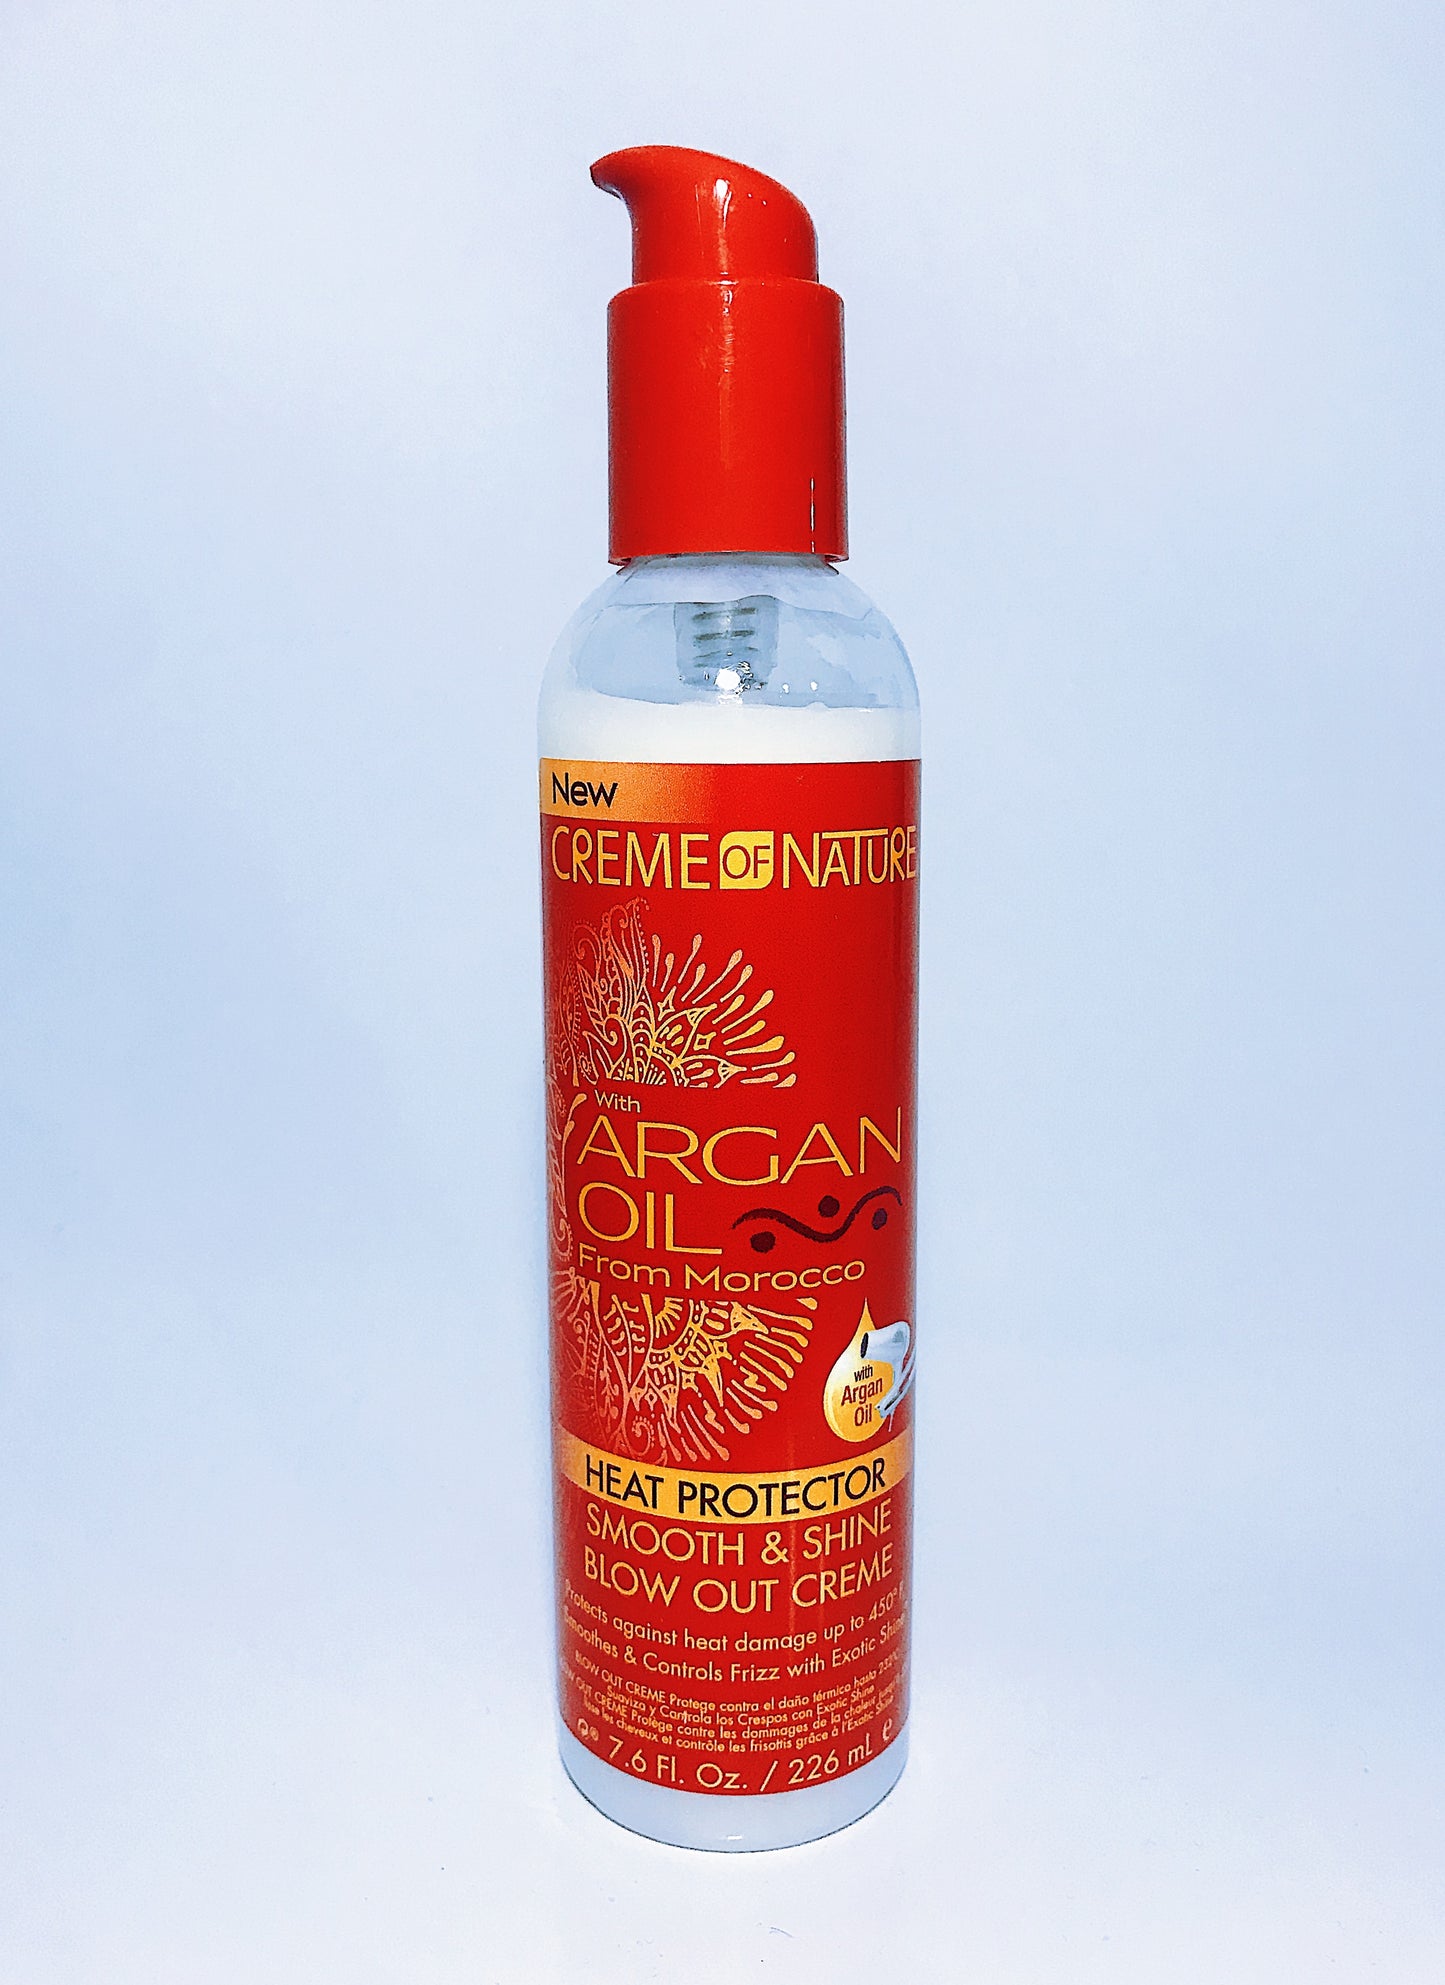 creme-of-nature-argan-oil-heat-protector-smooth-shine-blow-out-creme.jpg